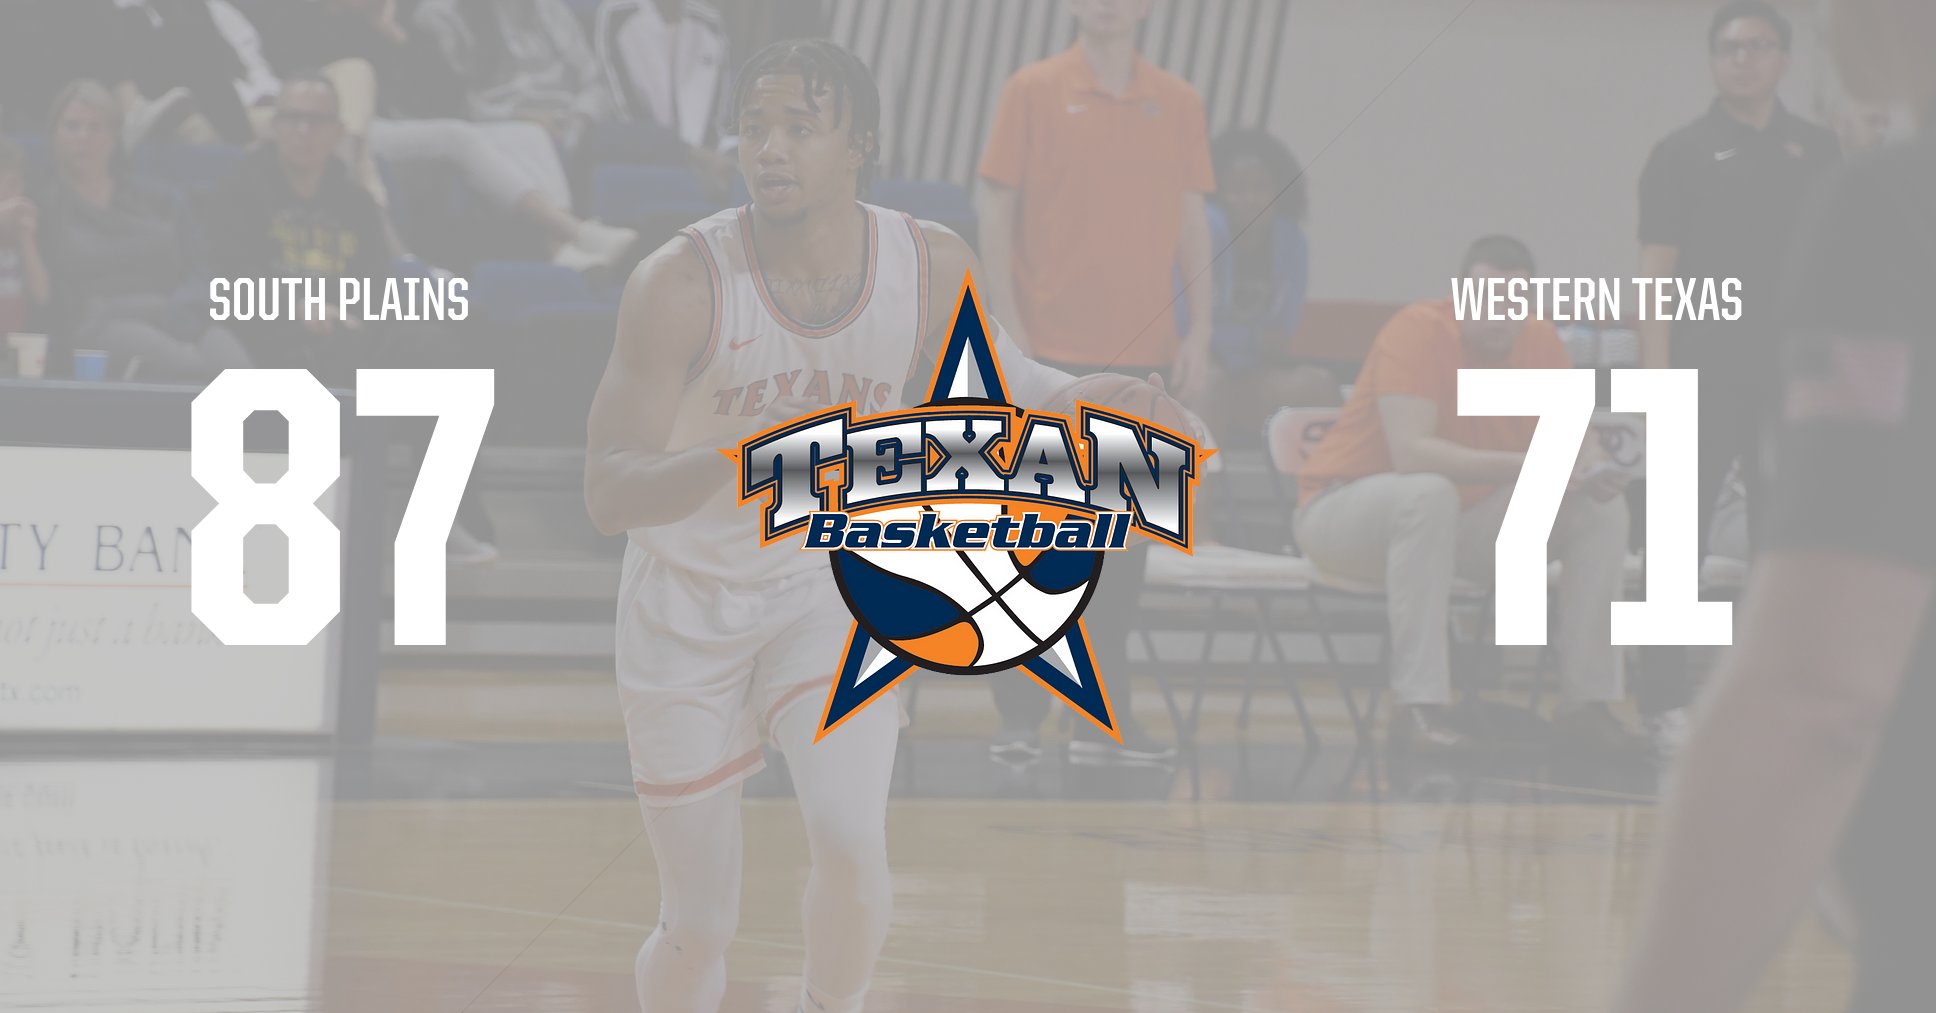 Texans win fourth straight, pound Western Texas 87-71 in Snyder